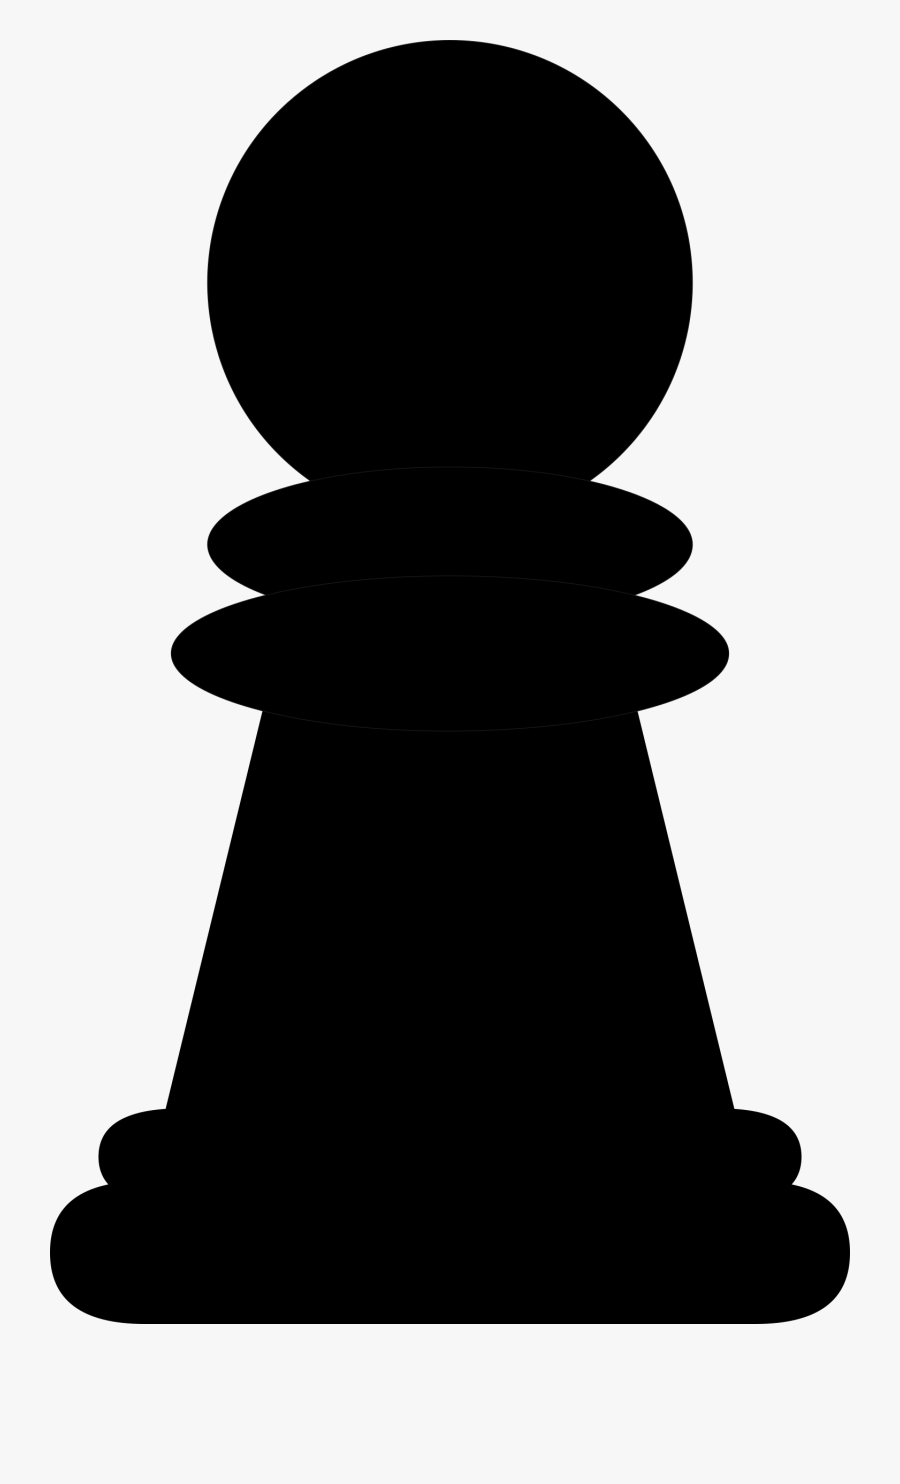 This Free Icons Png Design Of Pawn - Clip Art Chess Pieces Pawn, Transparent Clipart